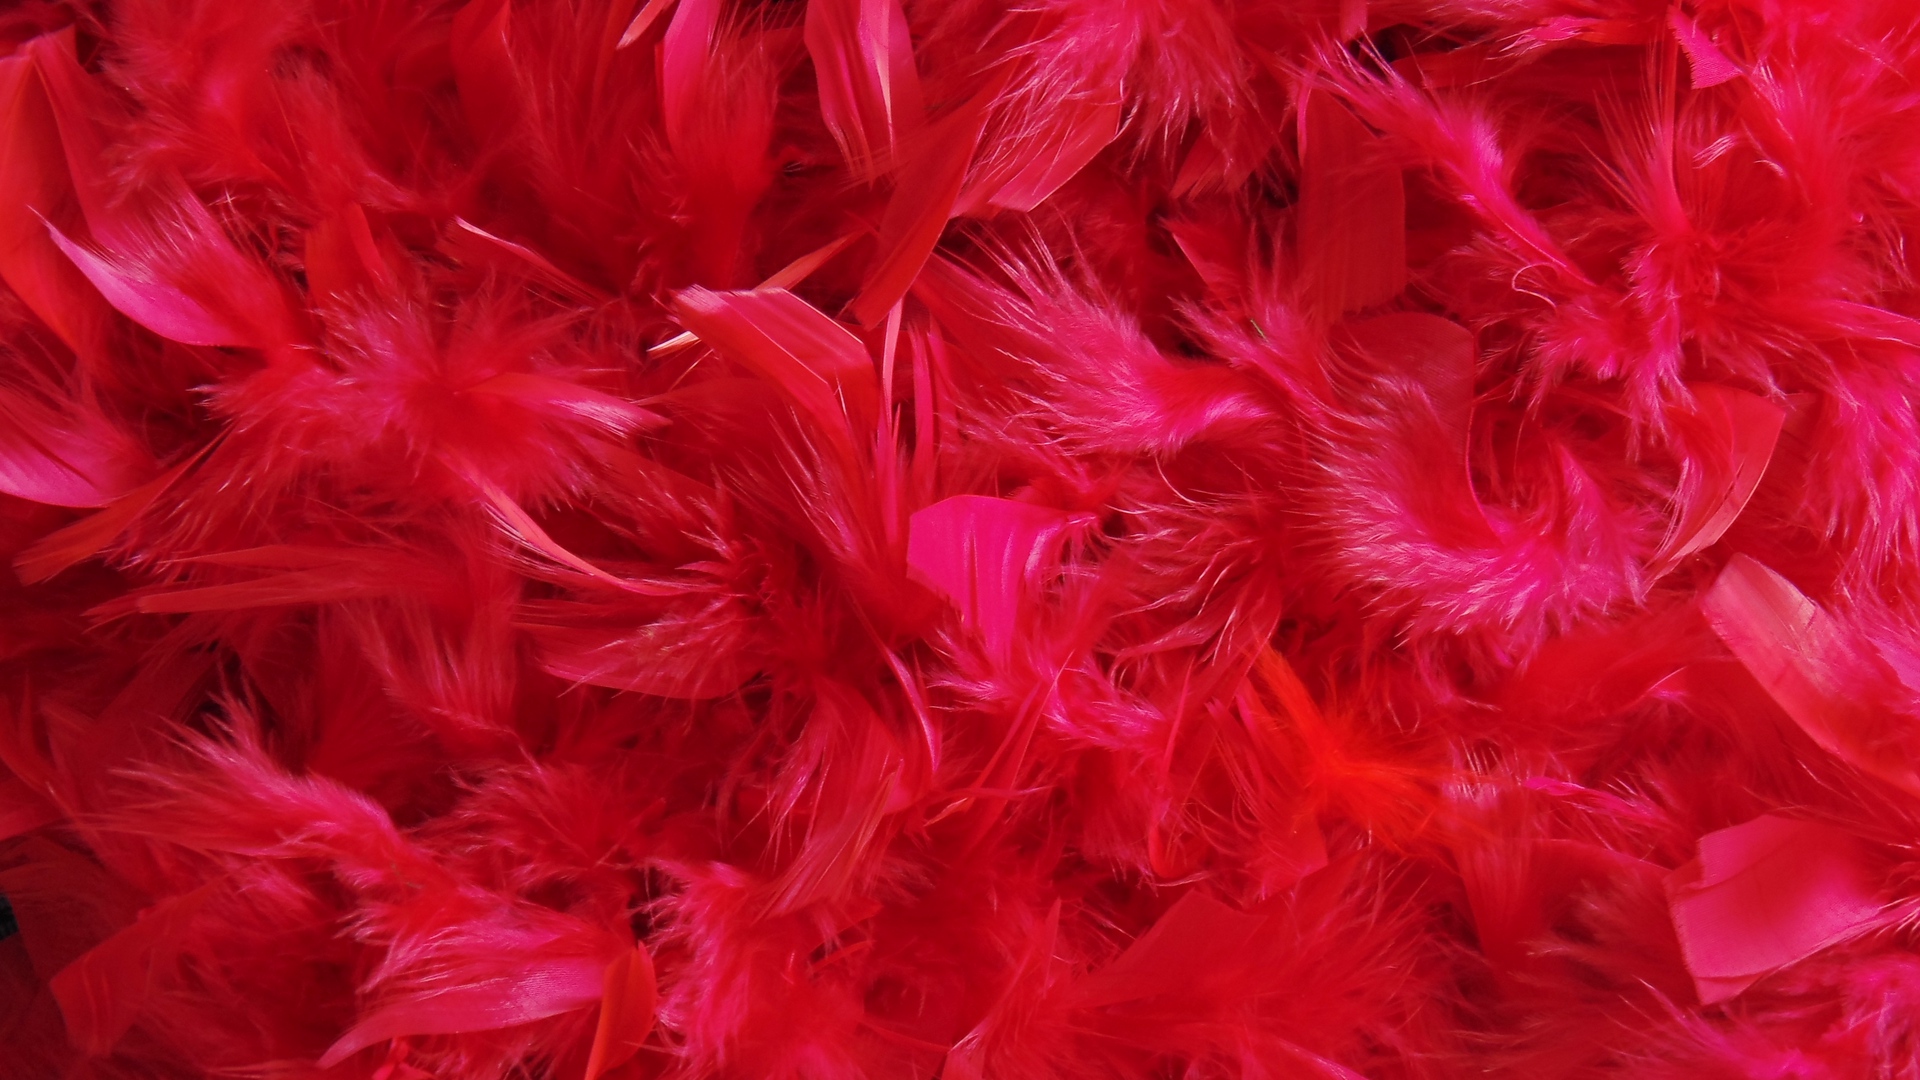 Wallpaper Feathers Down Red Full HD HDtv